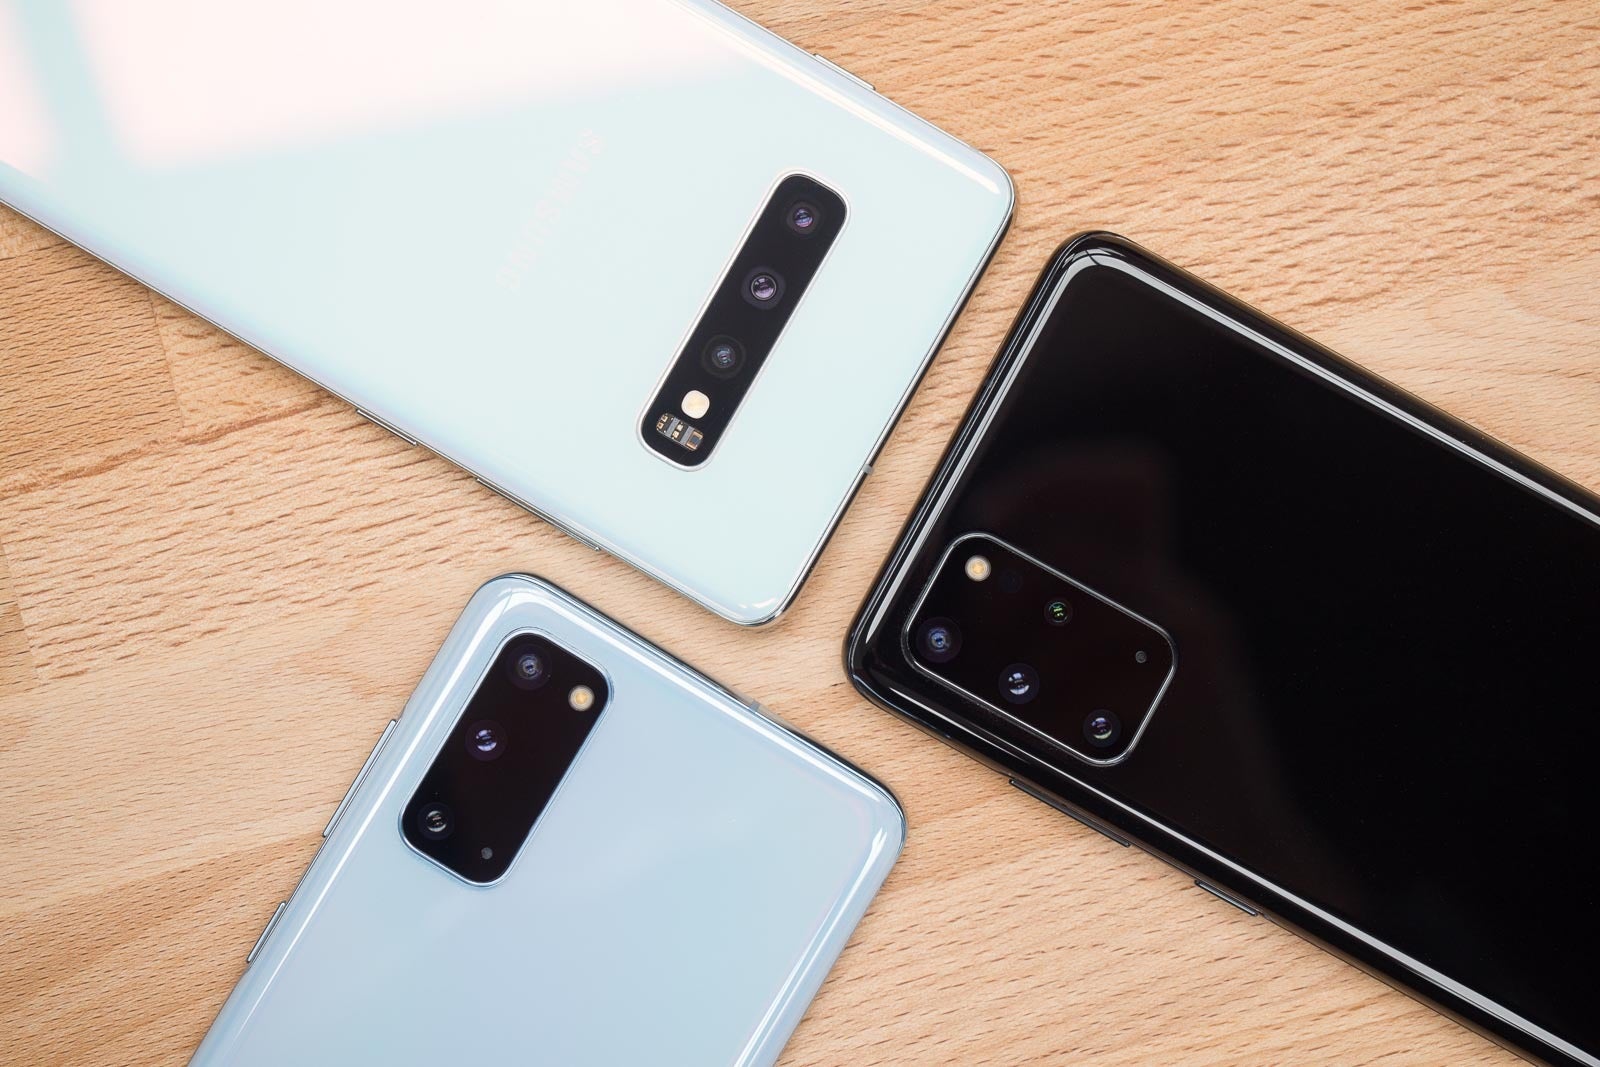 Samsung Galaxy S20+ vs Galaxy S20 vs Galaxy S10+ - Samsung shareholders: why can't you be more like Apple?